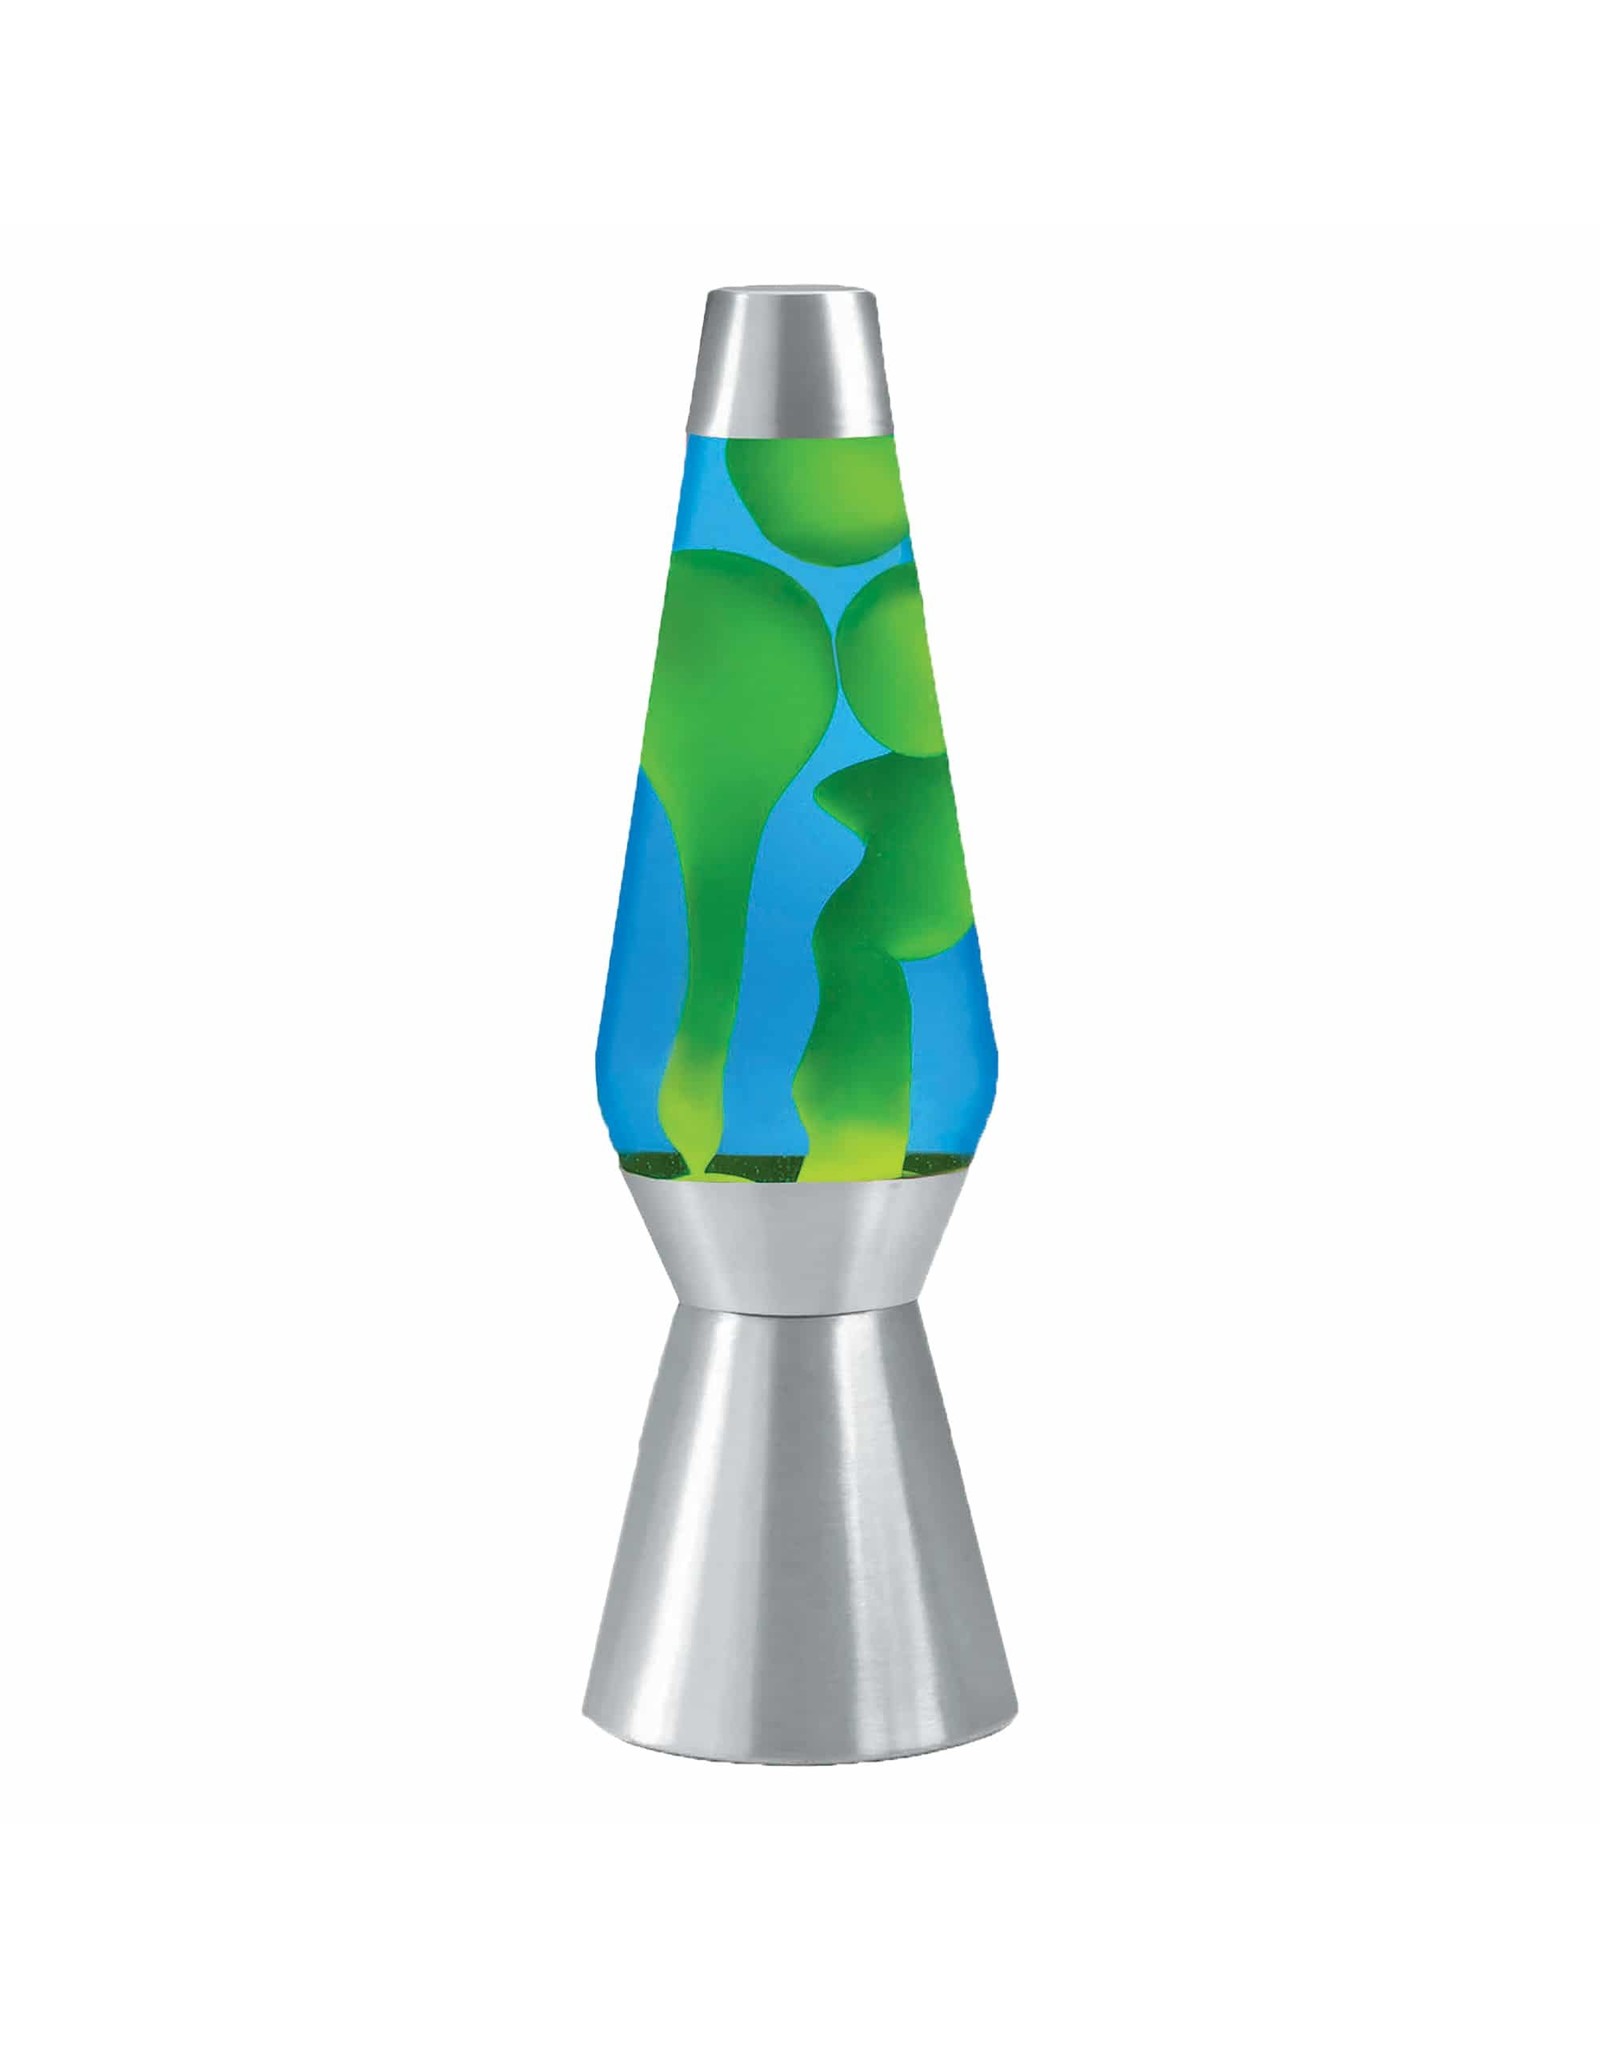 Lava 27" Lava Lamp - Not available for shipping. Pick up only.